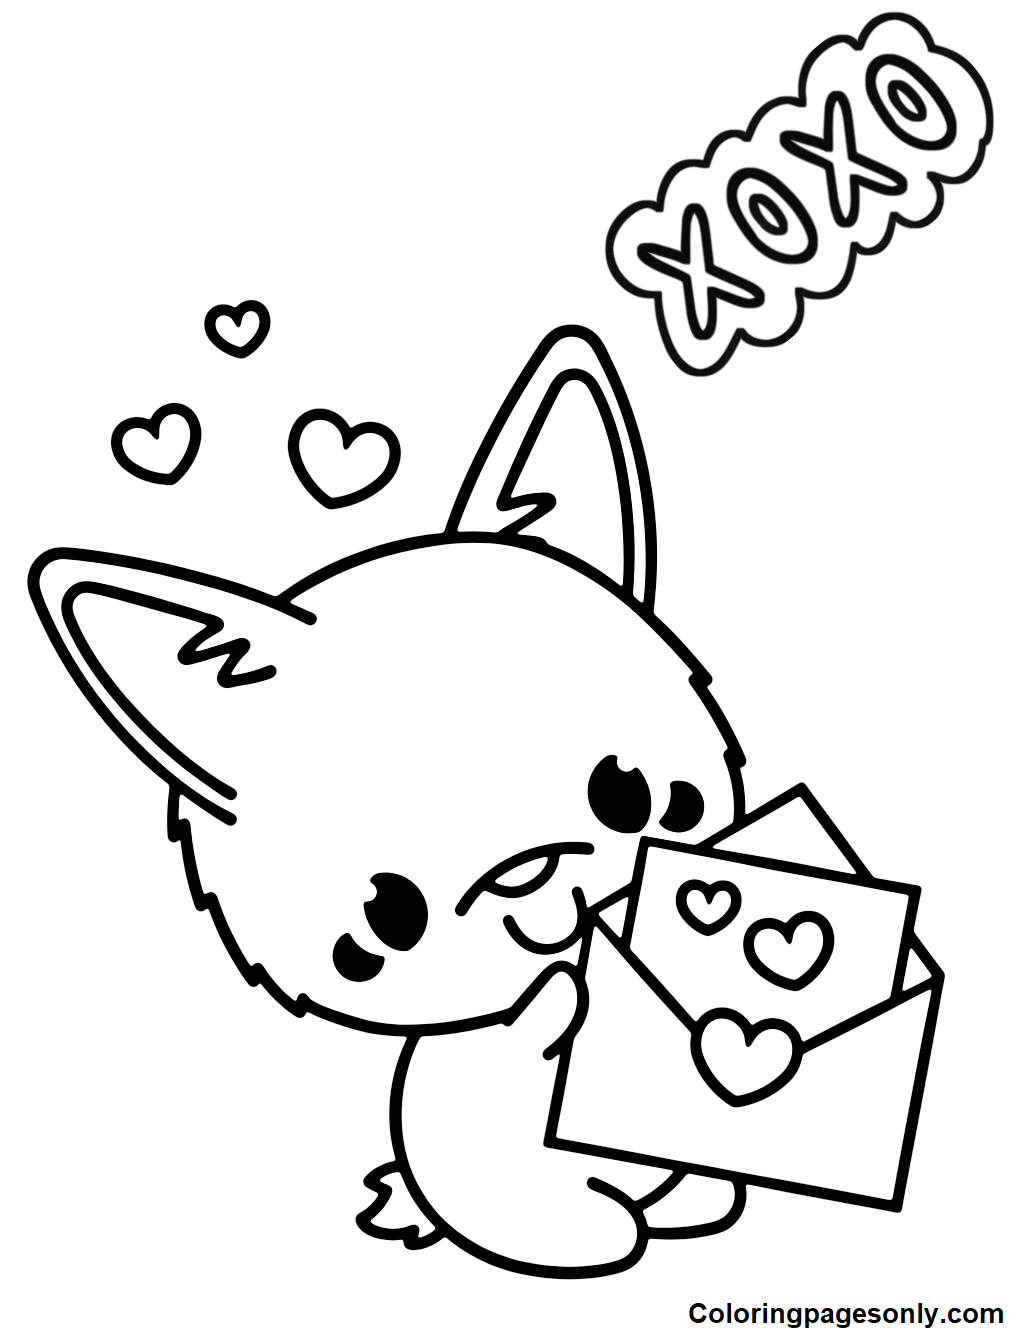 Welsh Corgi in Valentine’s Day Coloring Pages